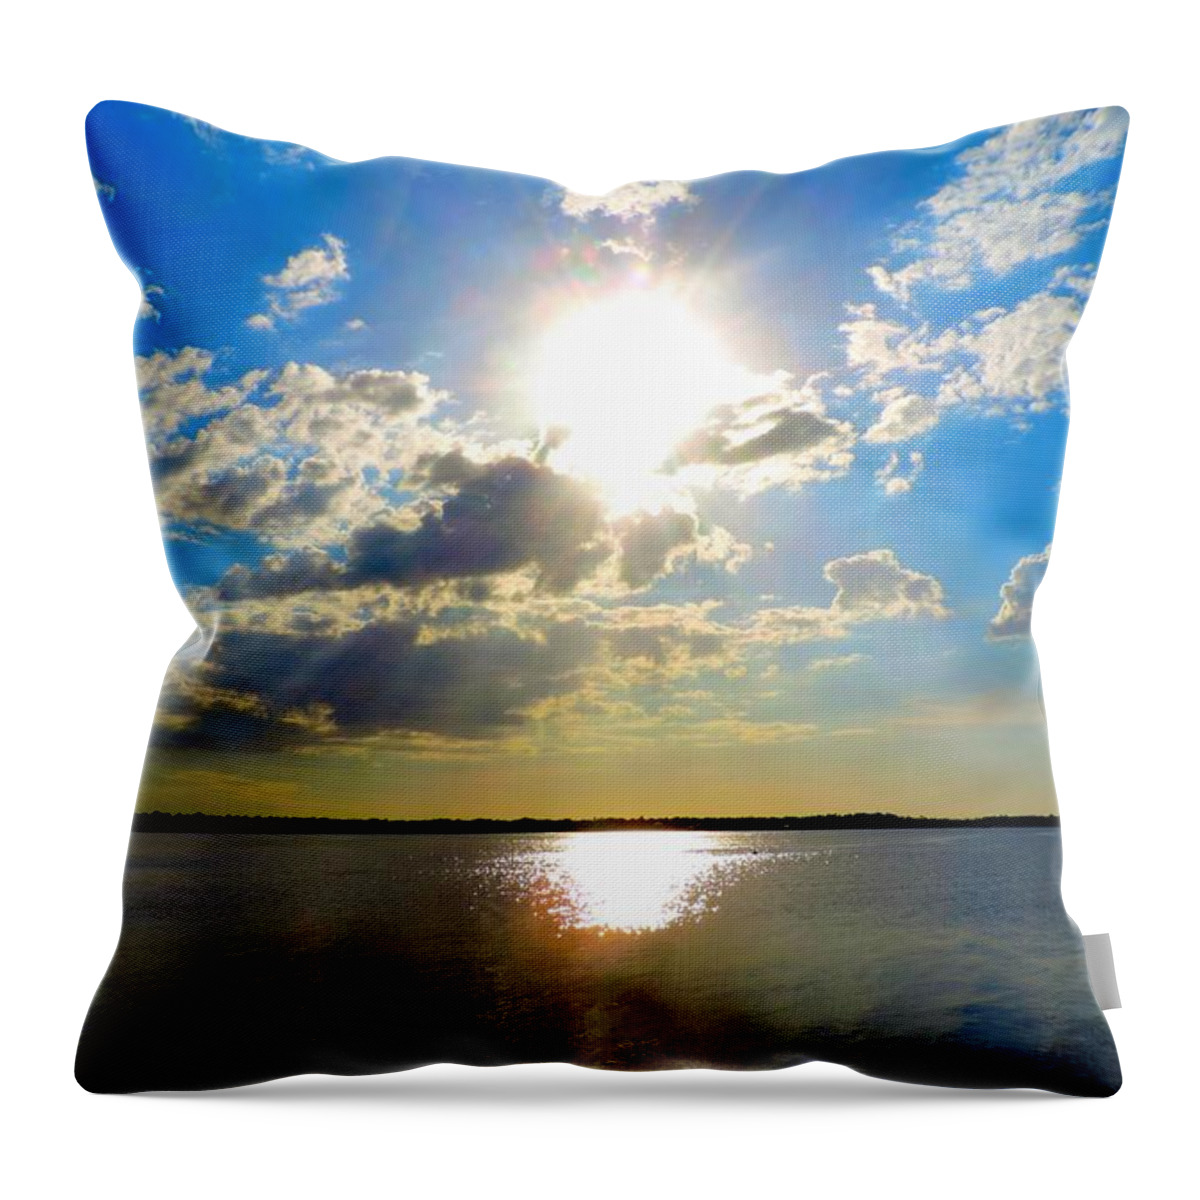 Sun Throw Pillow featuring the digital art Bright Day by Alison Belsan Horton